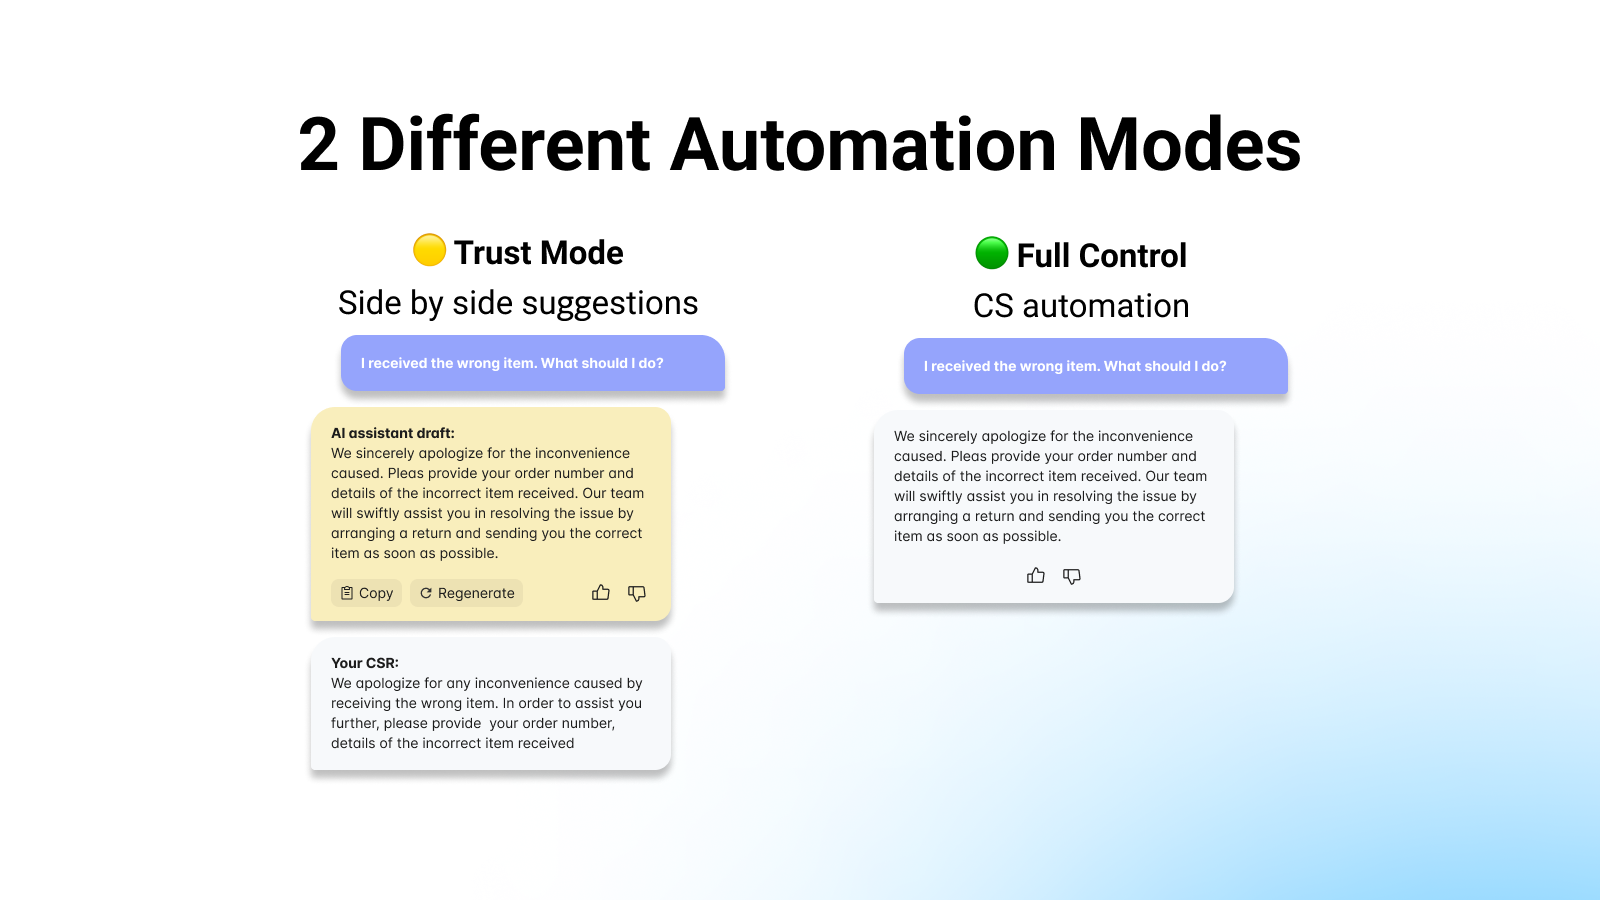 2 different automation modes - Trust & Full Control